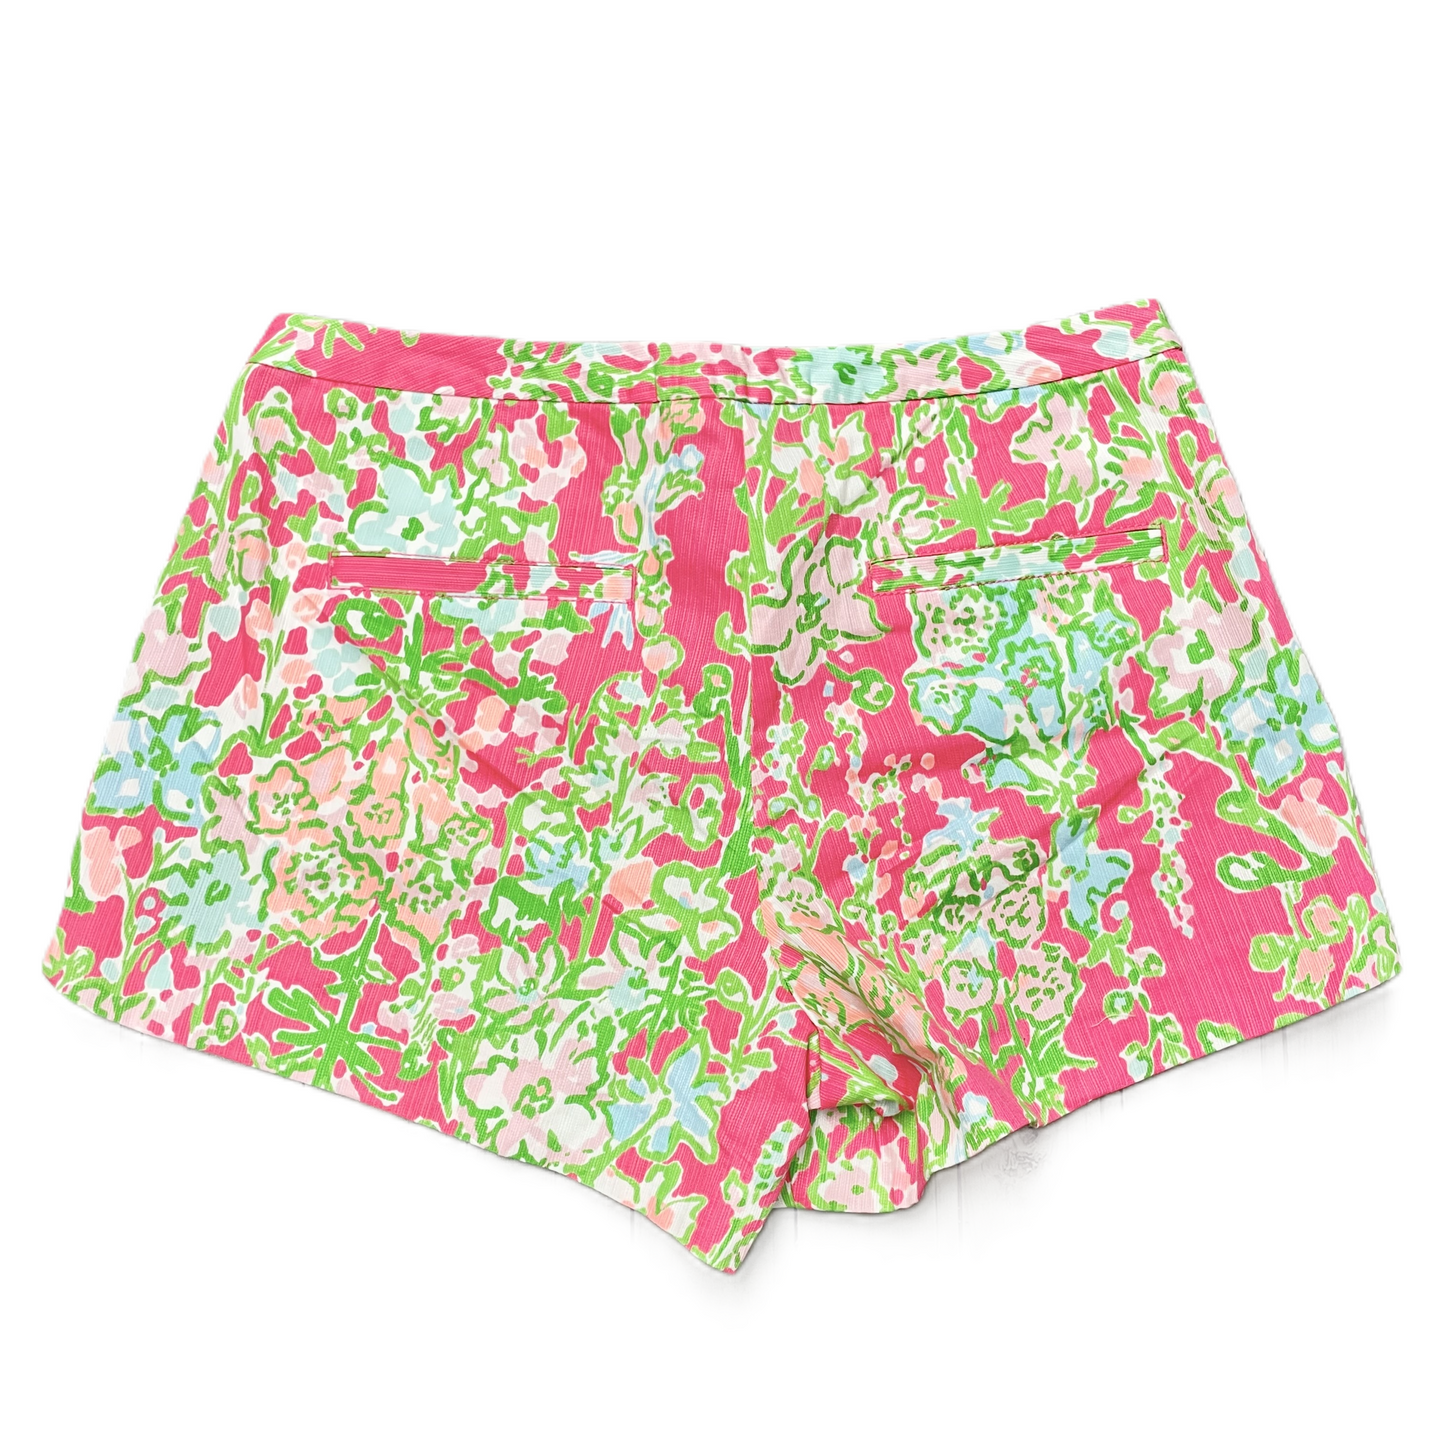 Green Shorts Designer By Lilly Pulitzer, Size: 8